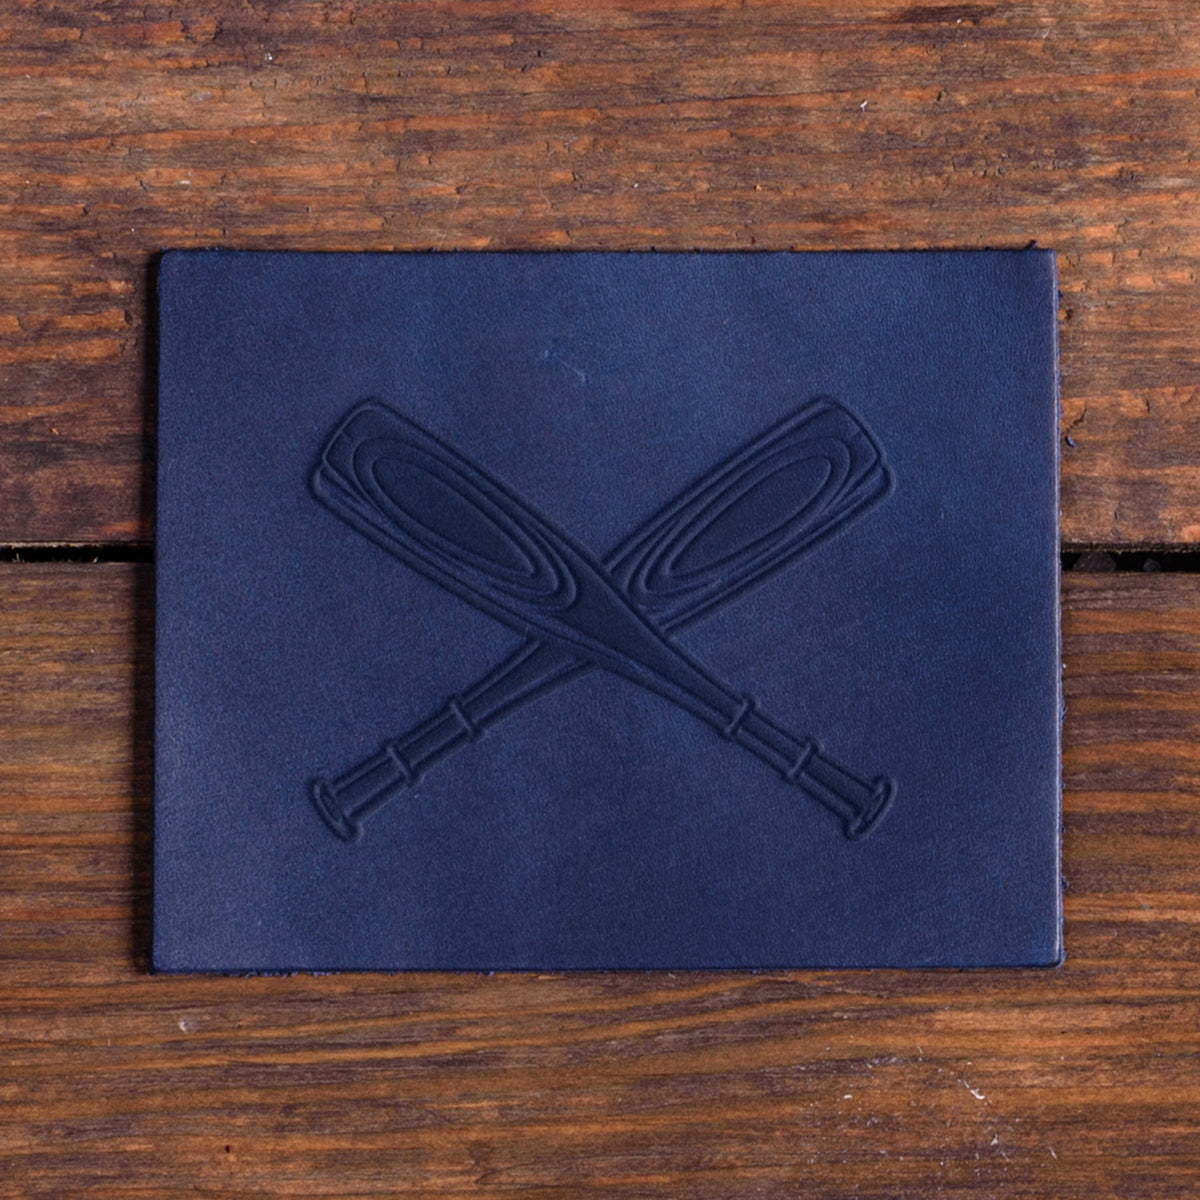 Baseball Bats Delrin Leather Stamp